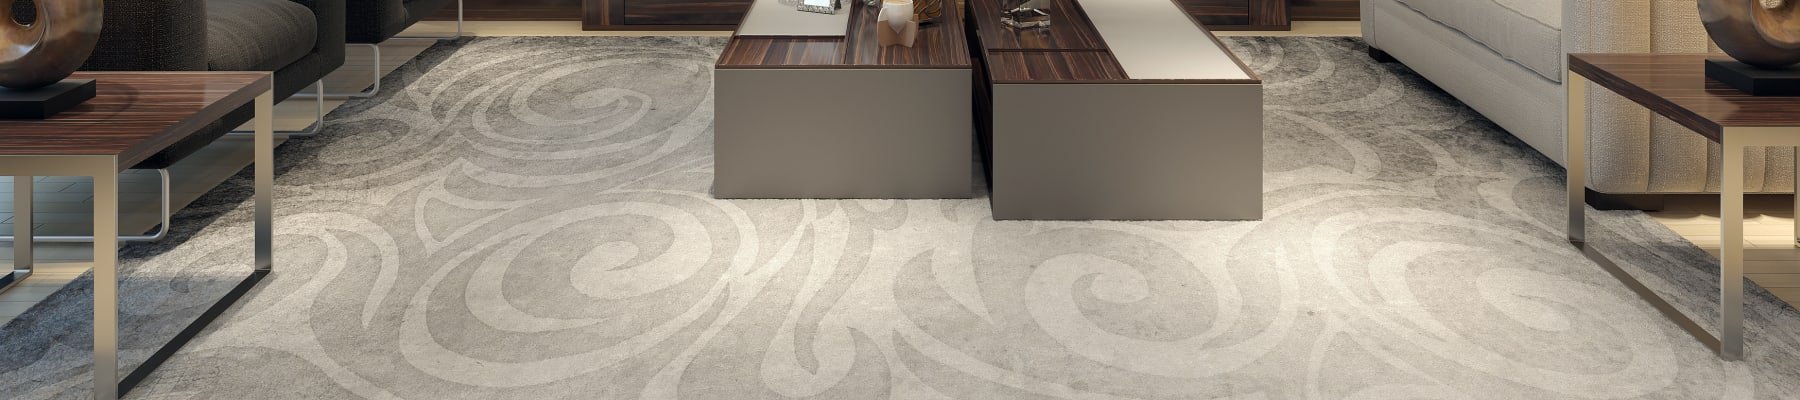 Commercial flooring provided by Superb Carpets in the Wheaton, IL area